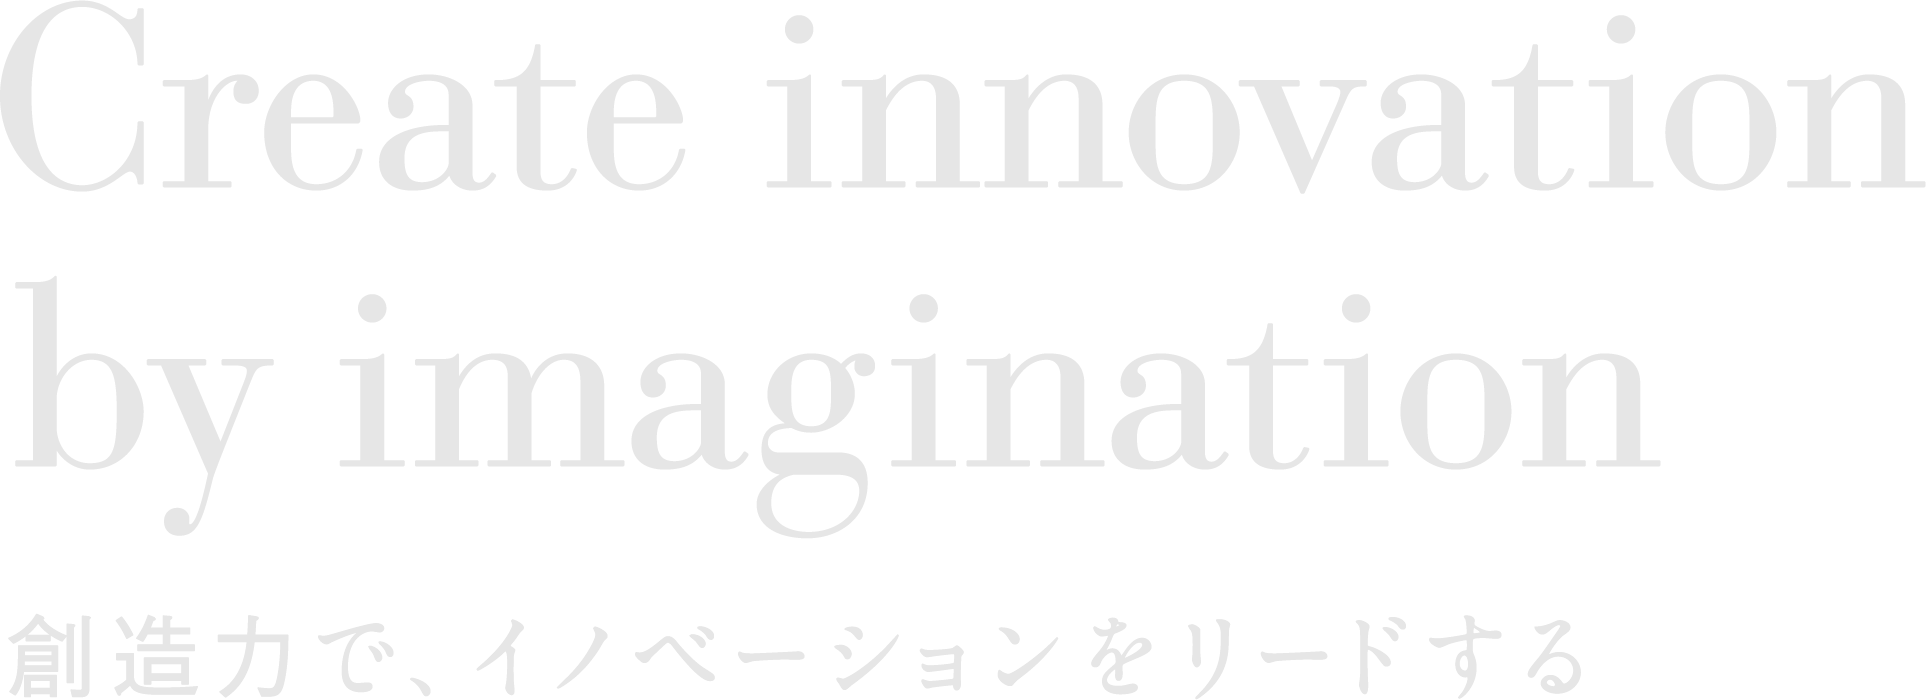 Creative innovation by imagination